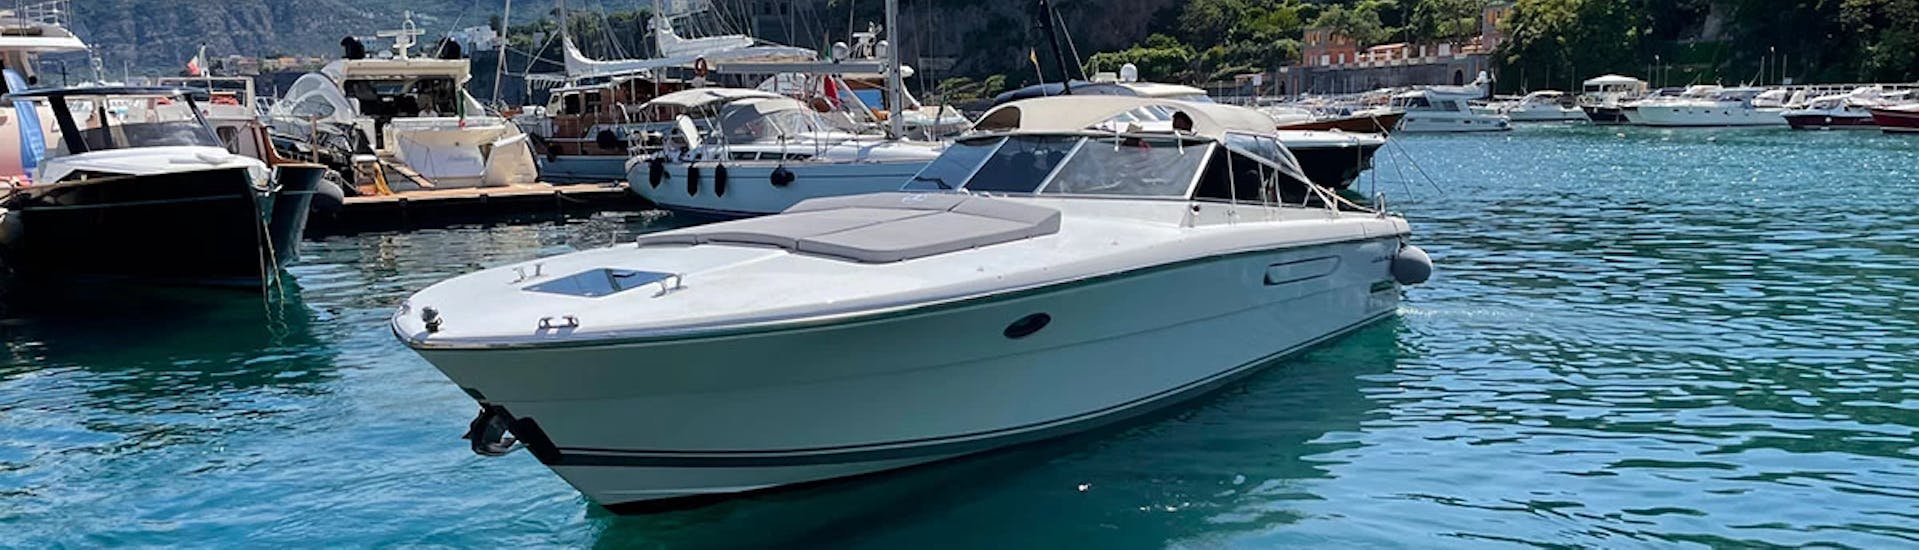 The boat Itama 38, one of the two boats available for the Private Boat Trip from Capri to Amalfi and Positano with Giuliani Charter Sorrento.